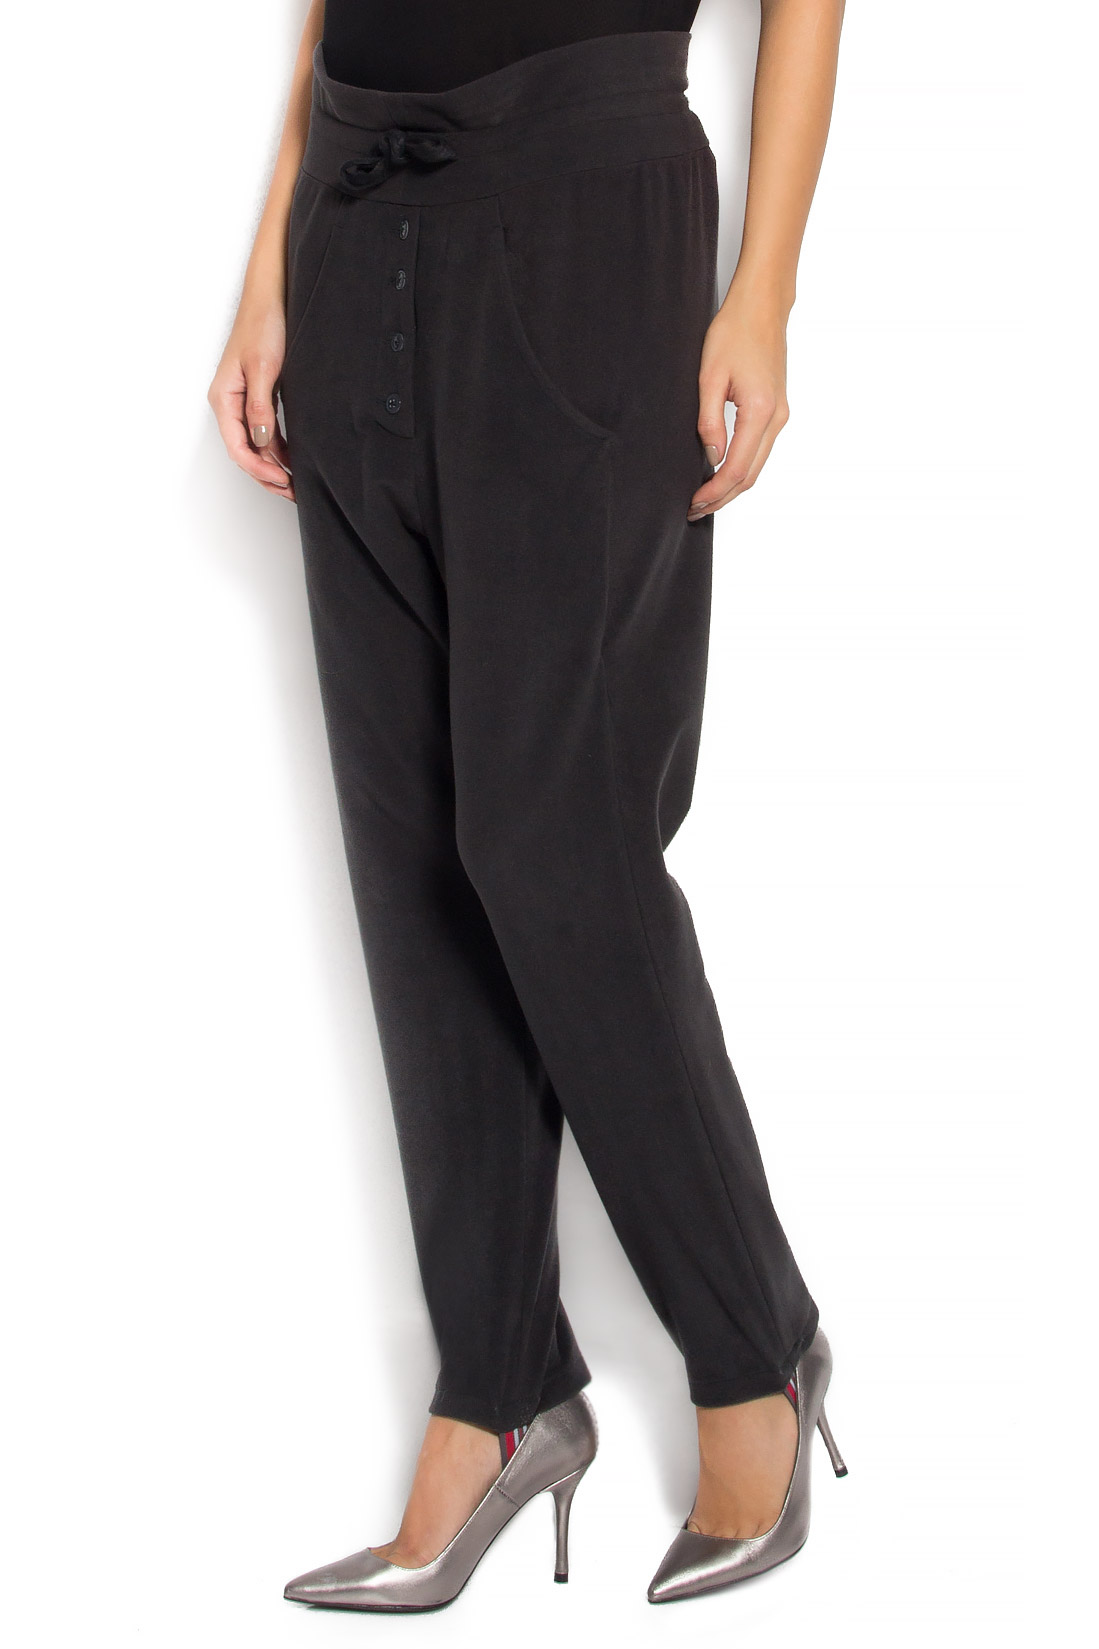 'Other Trousers' wool track pants Studio Cabal image 1